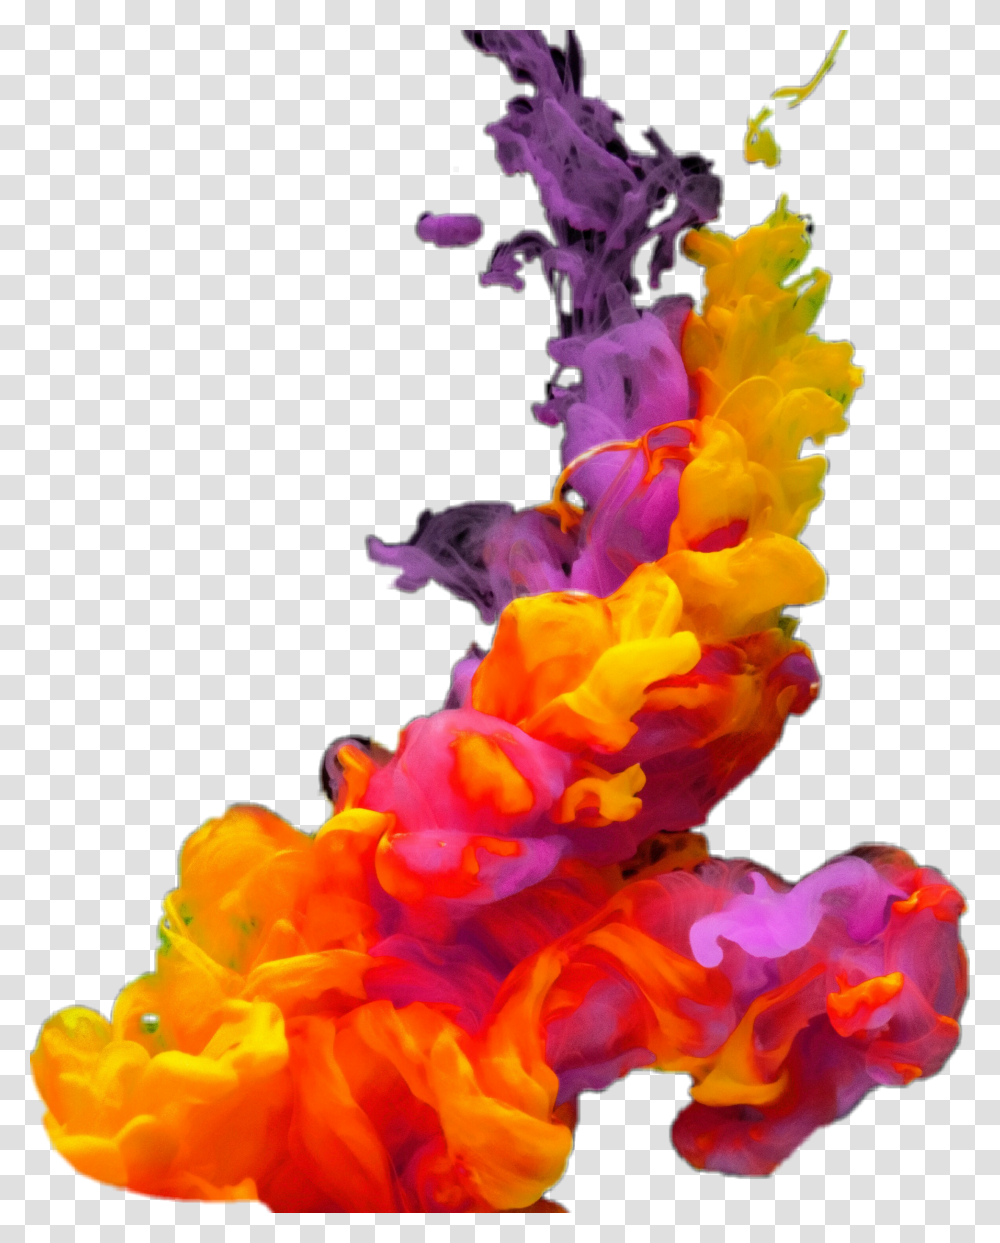 Silverstein Works Colorful Smoke Background Hd, Plant, Flower, Pollen, Purple Transparent Png